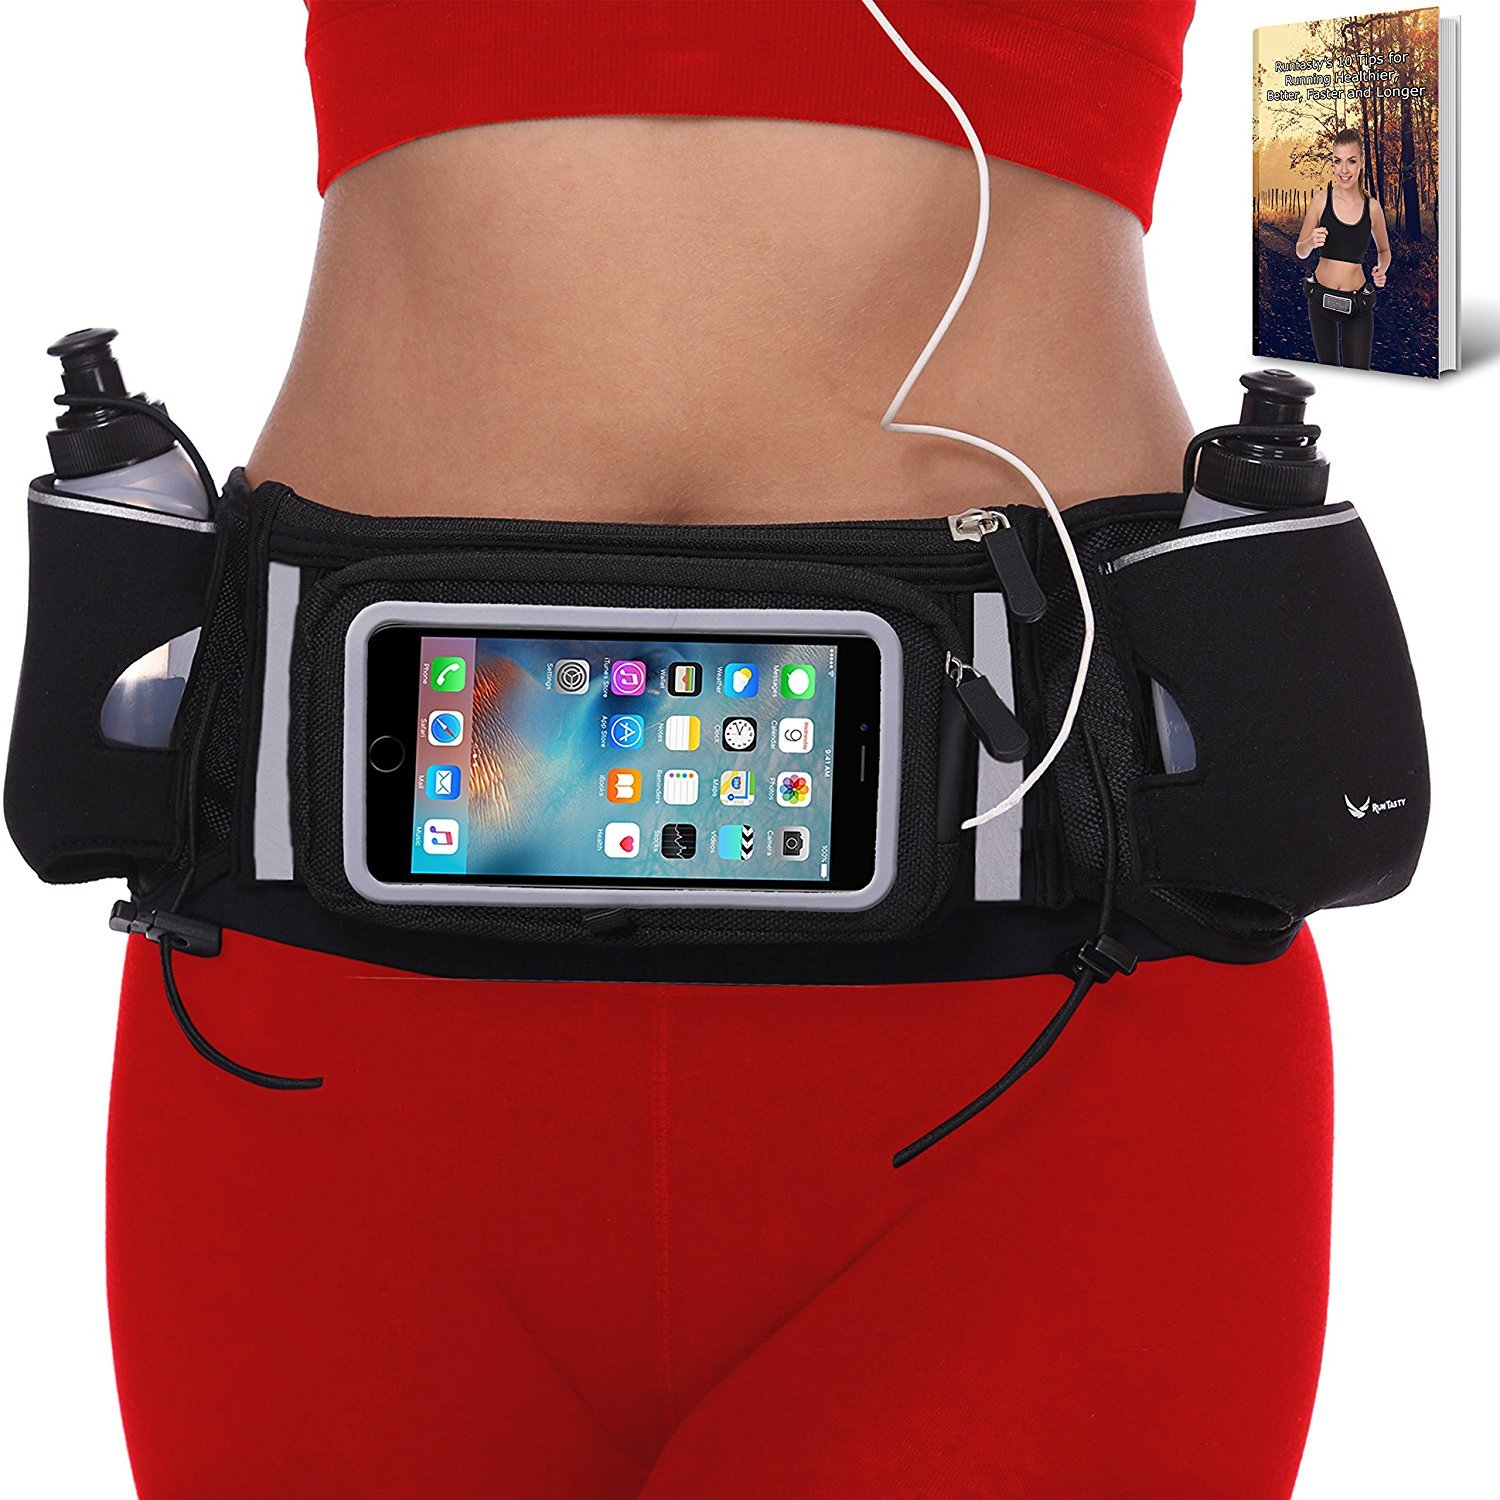 Adjustable Runners Belt with Phone Holder for Running and Key Clip EXCLUSIVE BUNDLES Running Belt Bundle with Running Headband and Wristband Fitness Belt and Running Pouch Fits All Phones.